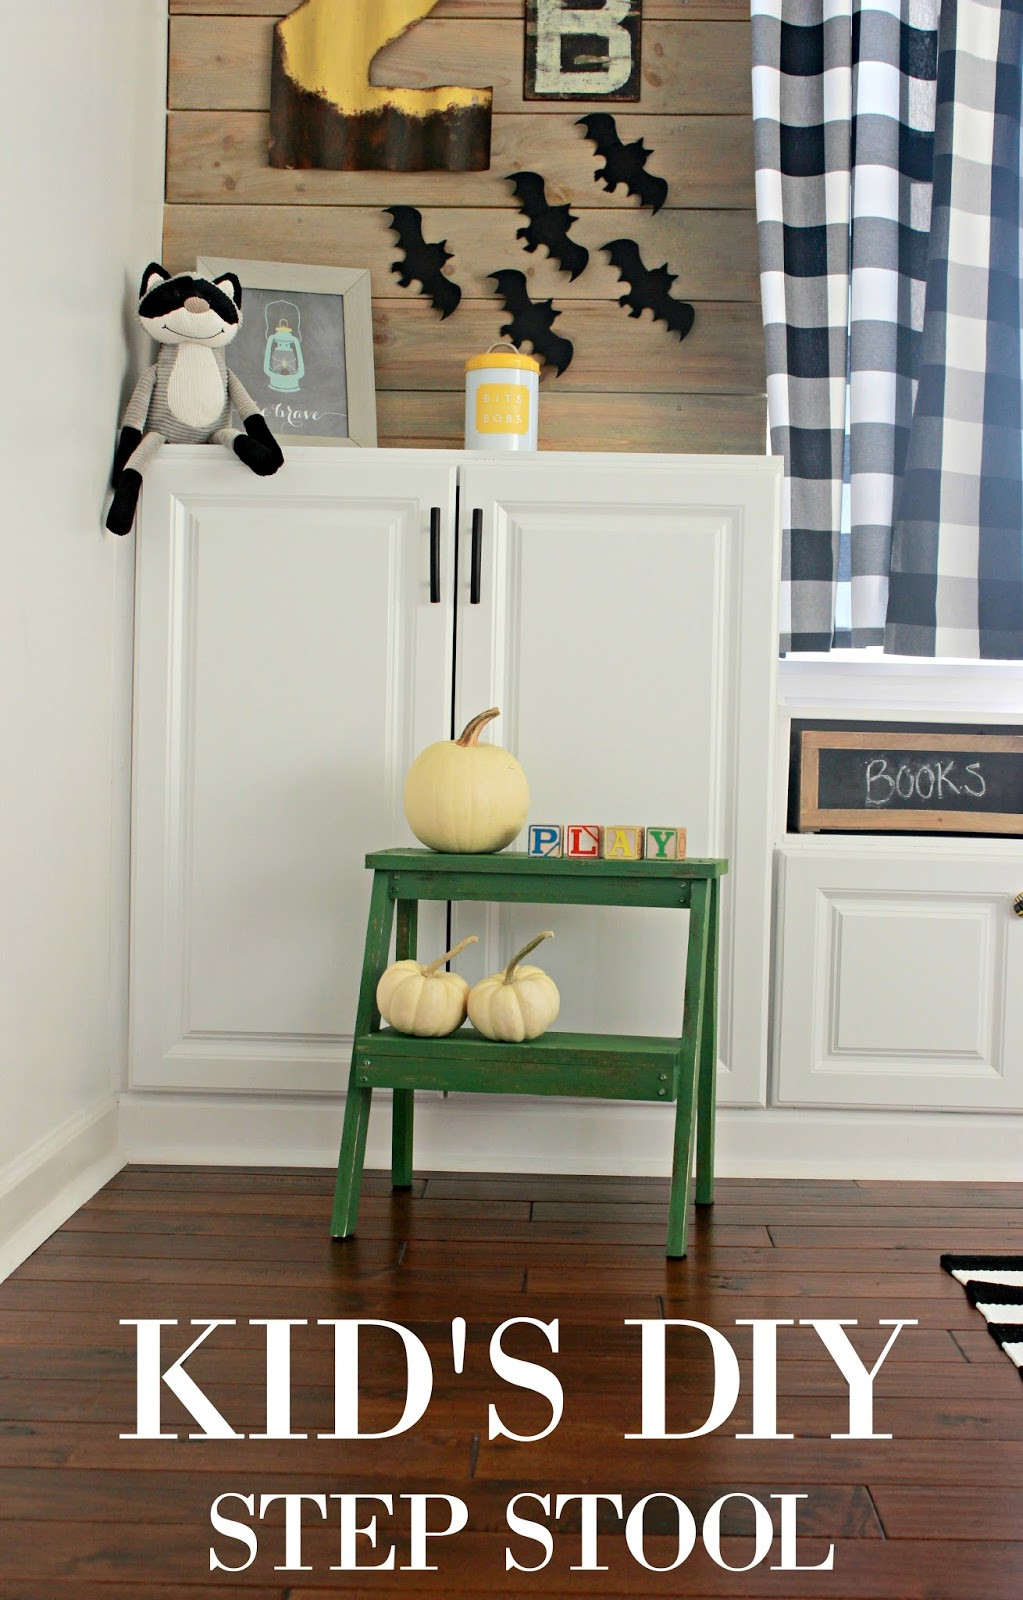 DIY Toddler Step Stool
 Kid s DIY Step Stool and a New Chalk Paint Adventure